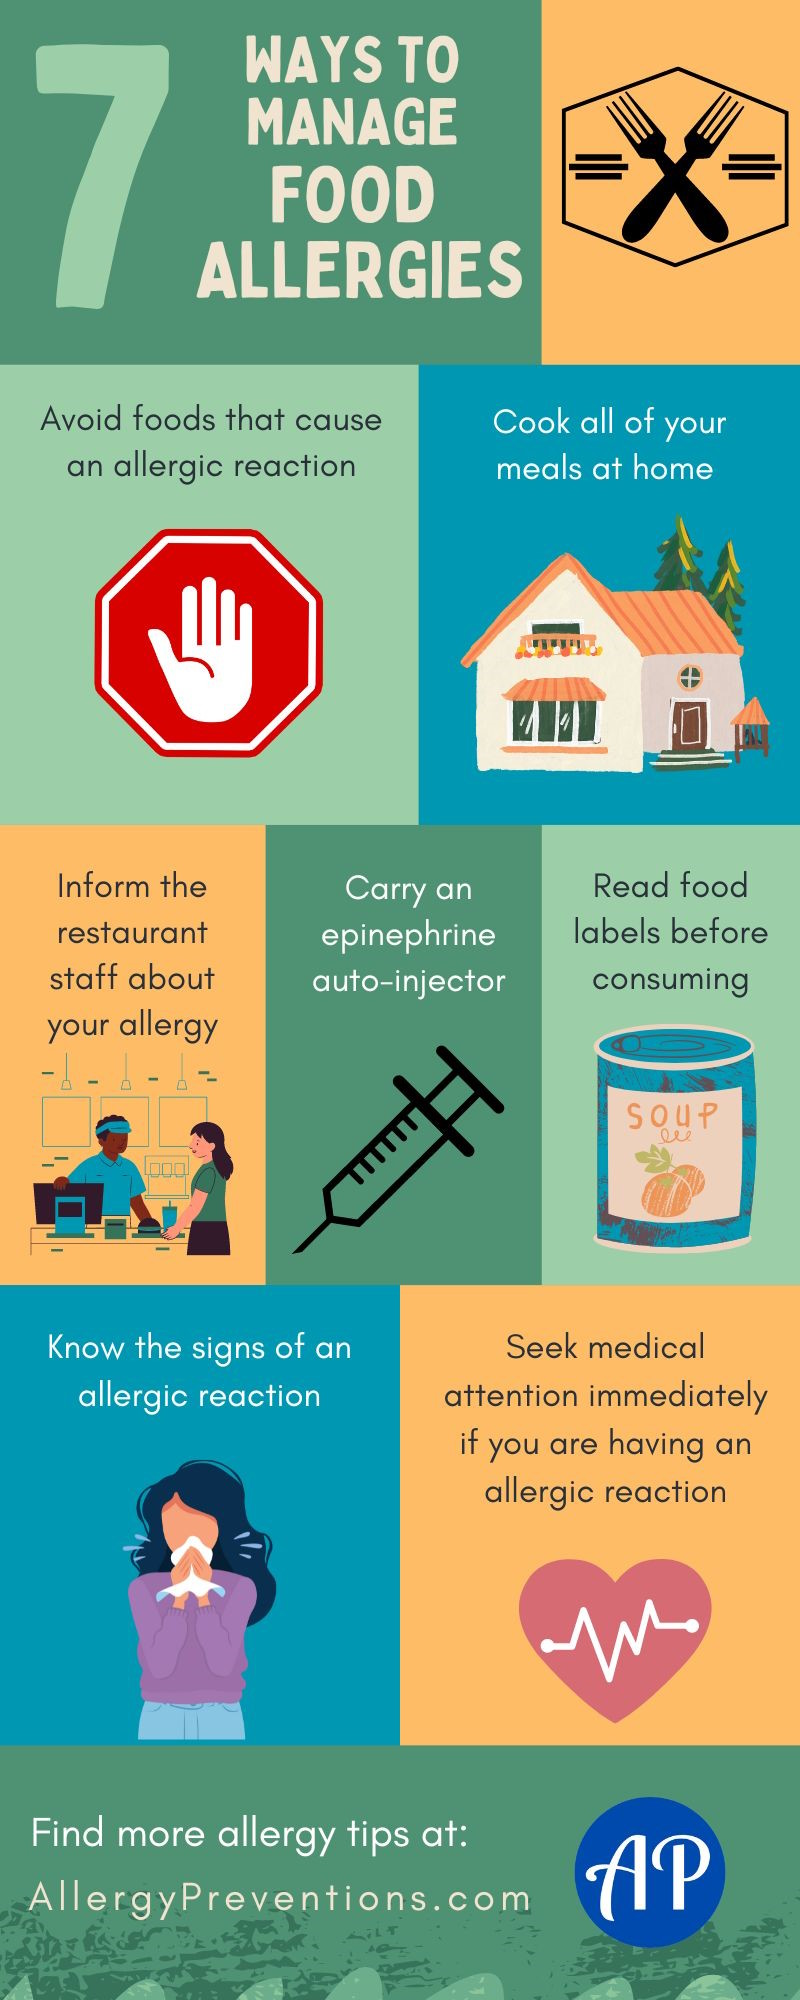 7 ways to manage food allergies info graphic. 1. Avoid foods that cause an allergic reactions. 2. Cook all of your meals at home. 3. Inform the resturant staff about your allergy. 4. Carry an epinephrine auto-injector. 5. Read food labels before consuming. 6. Know the signs of an allergic reaction. 7. Seek medical attention immediately if you are having an allergic reaction. Food more tips at allerypreventions.com